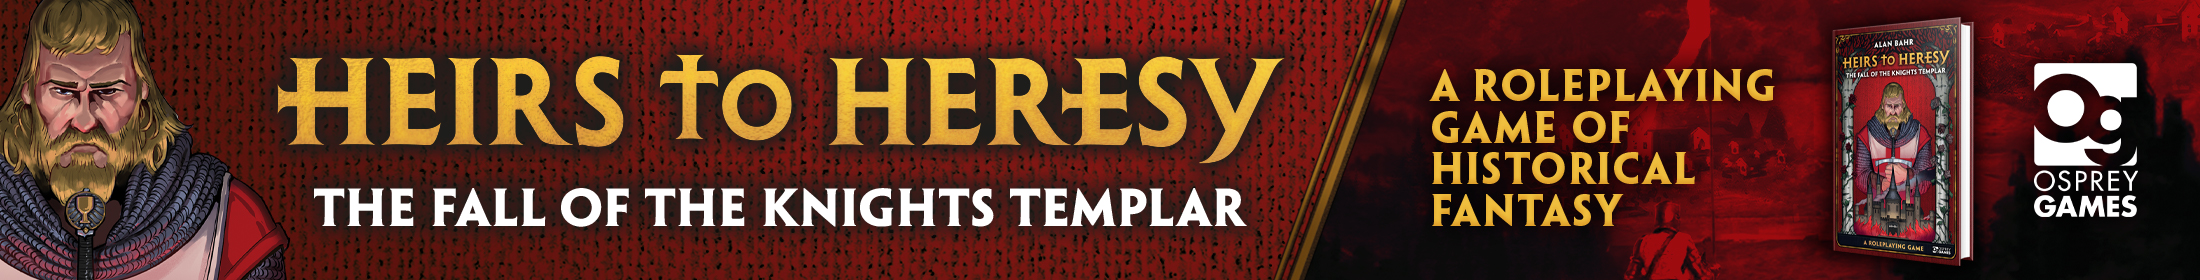 Heirs to Heresy: The Fall of the Knights Templar: A Roleplaying Game